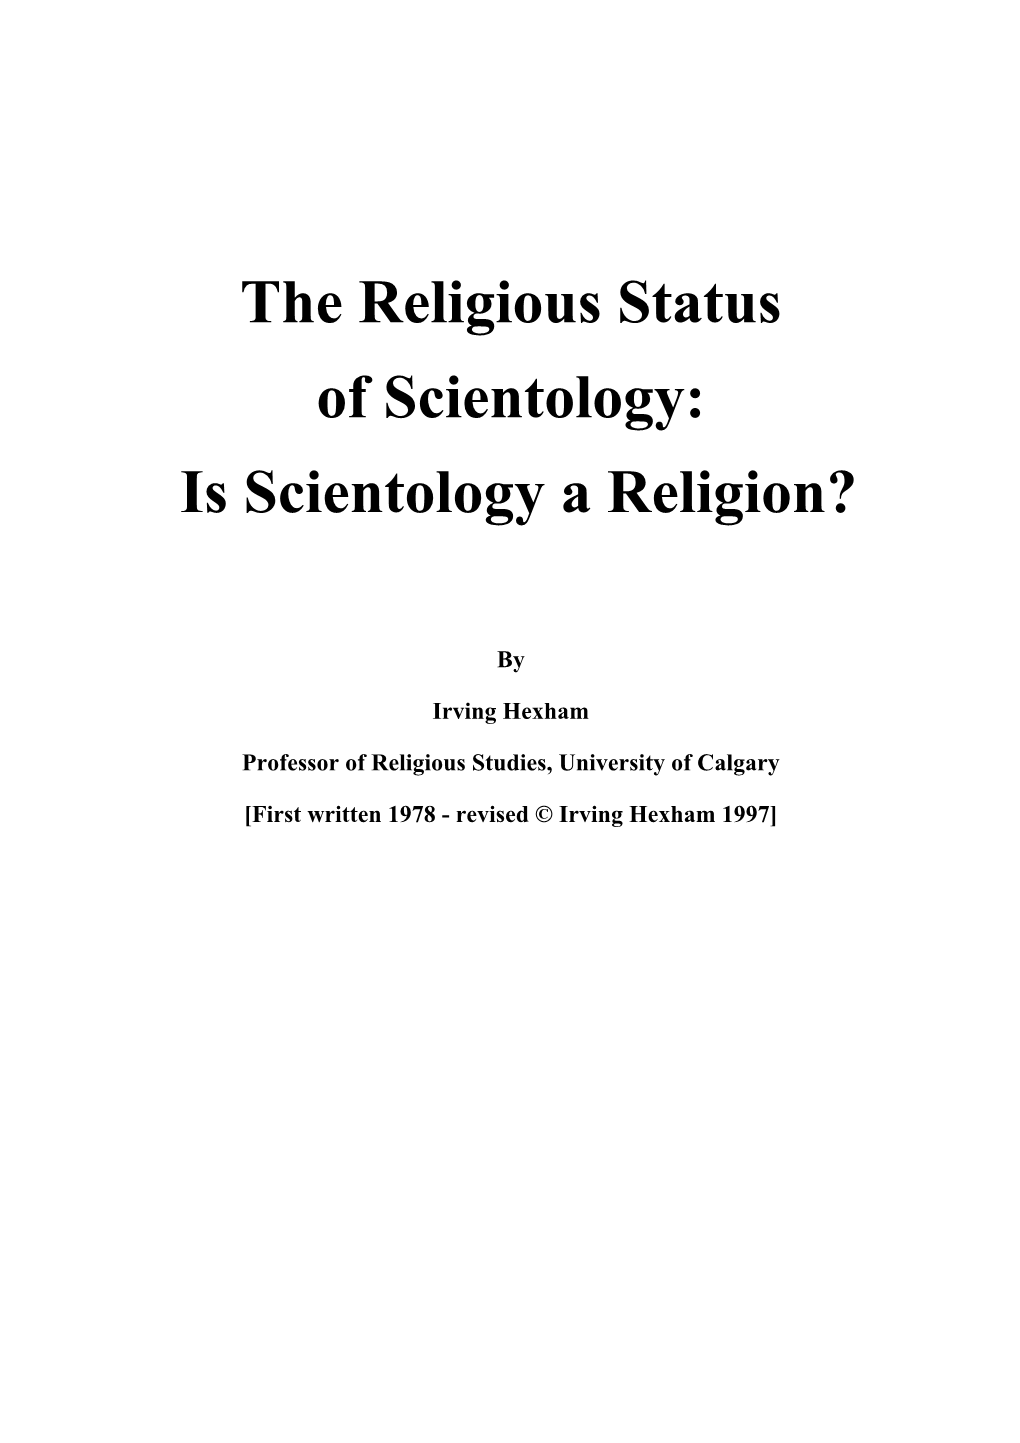 The Religious Status of Scientology: Is Scientology a Religion?